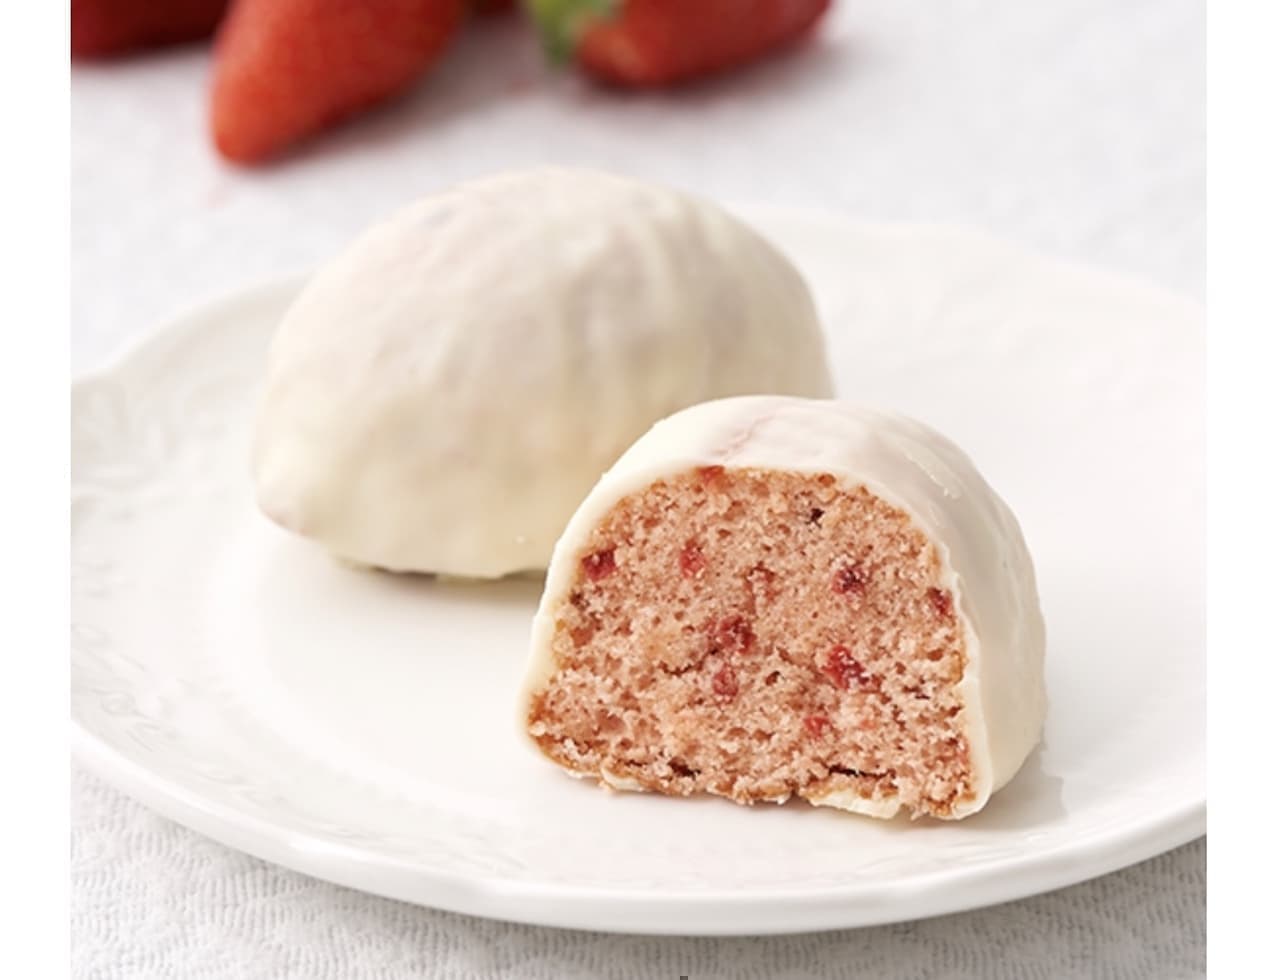 Chateraise "Ohisama-scented Strawberry Cake